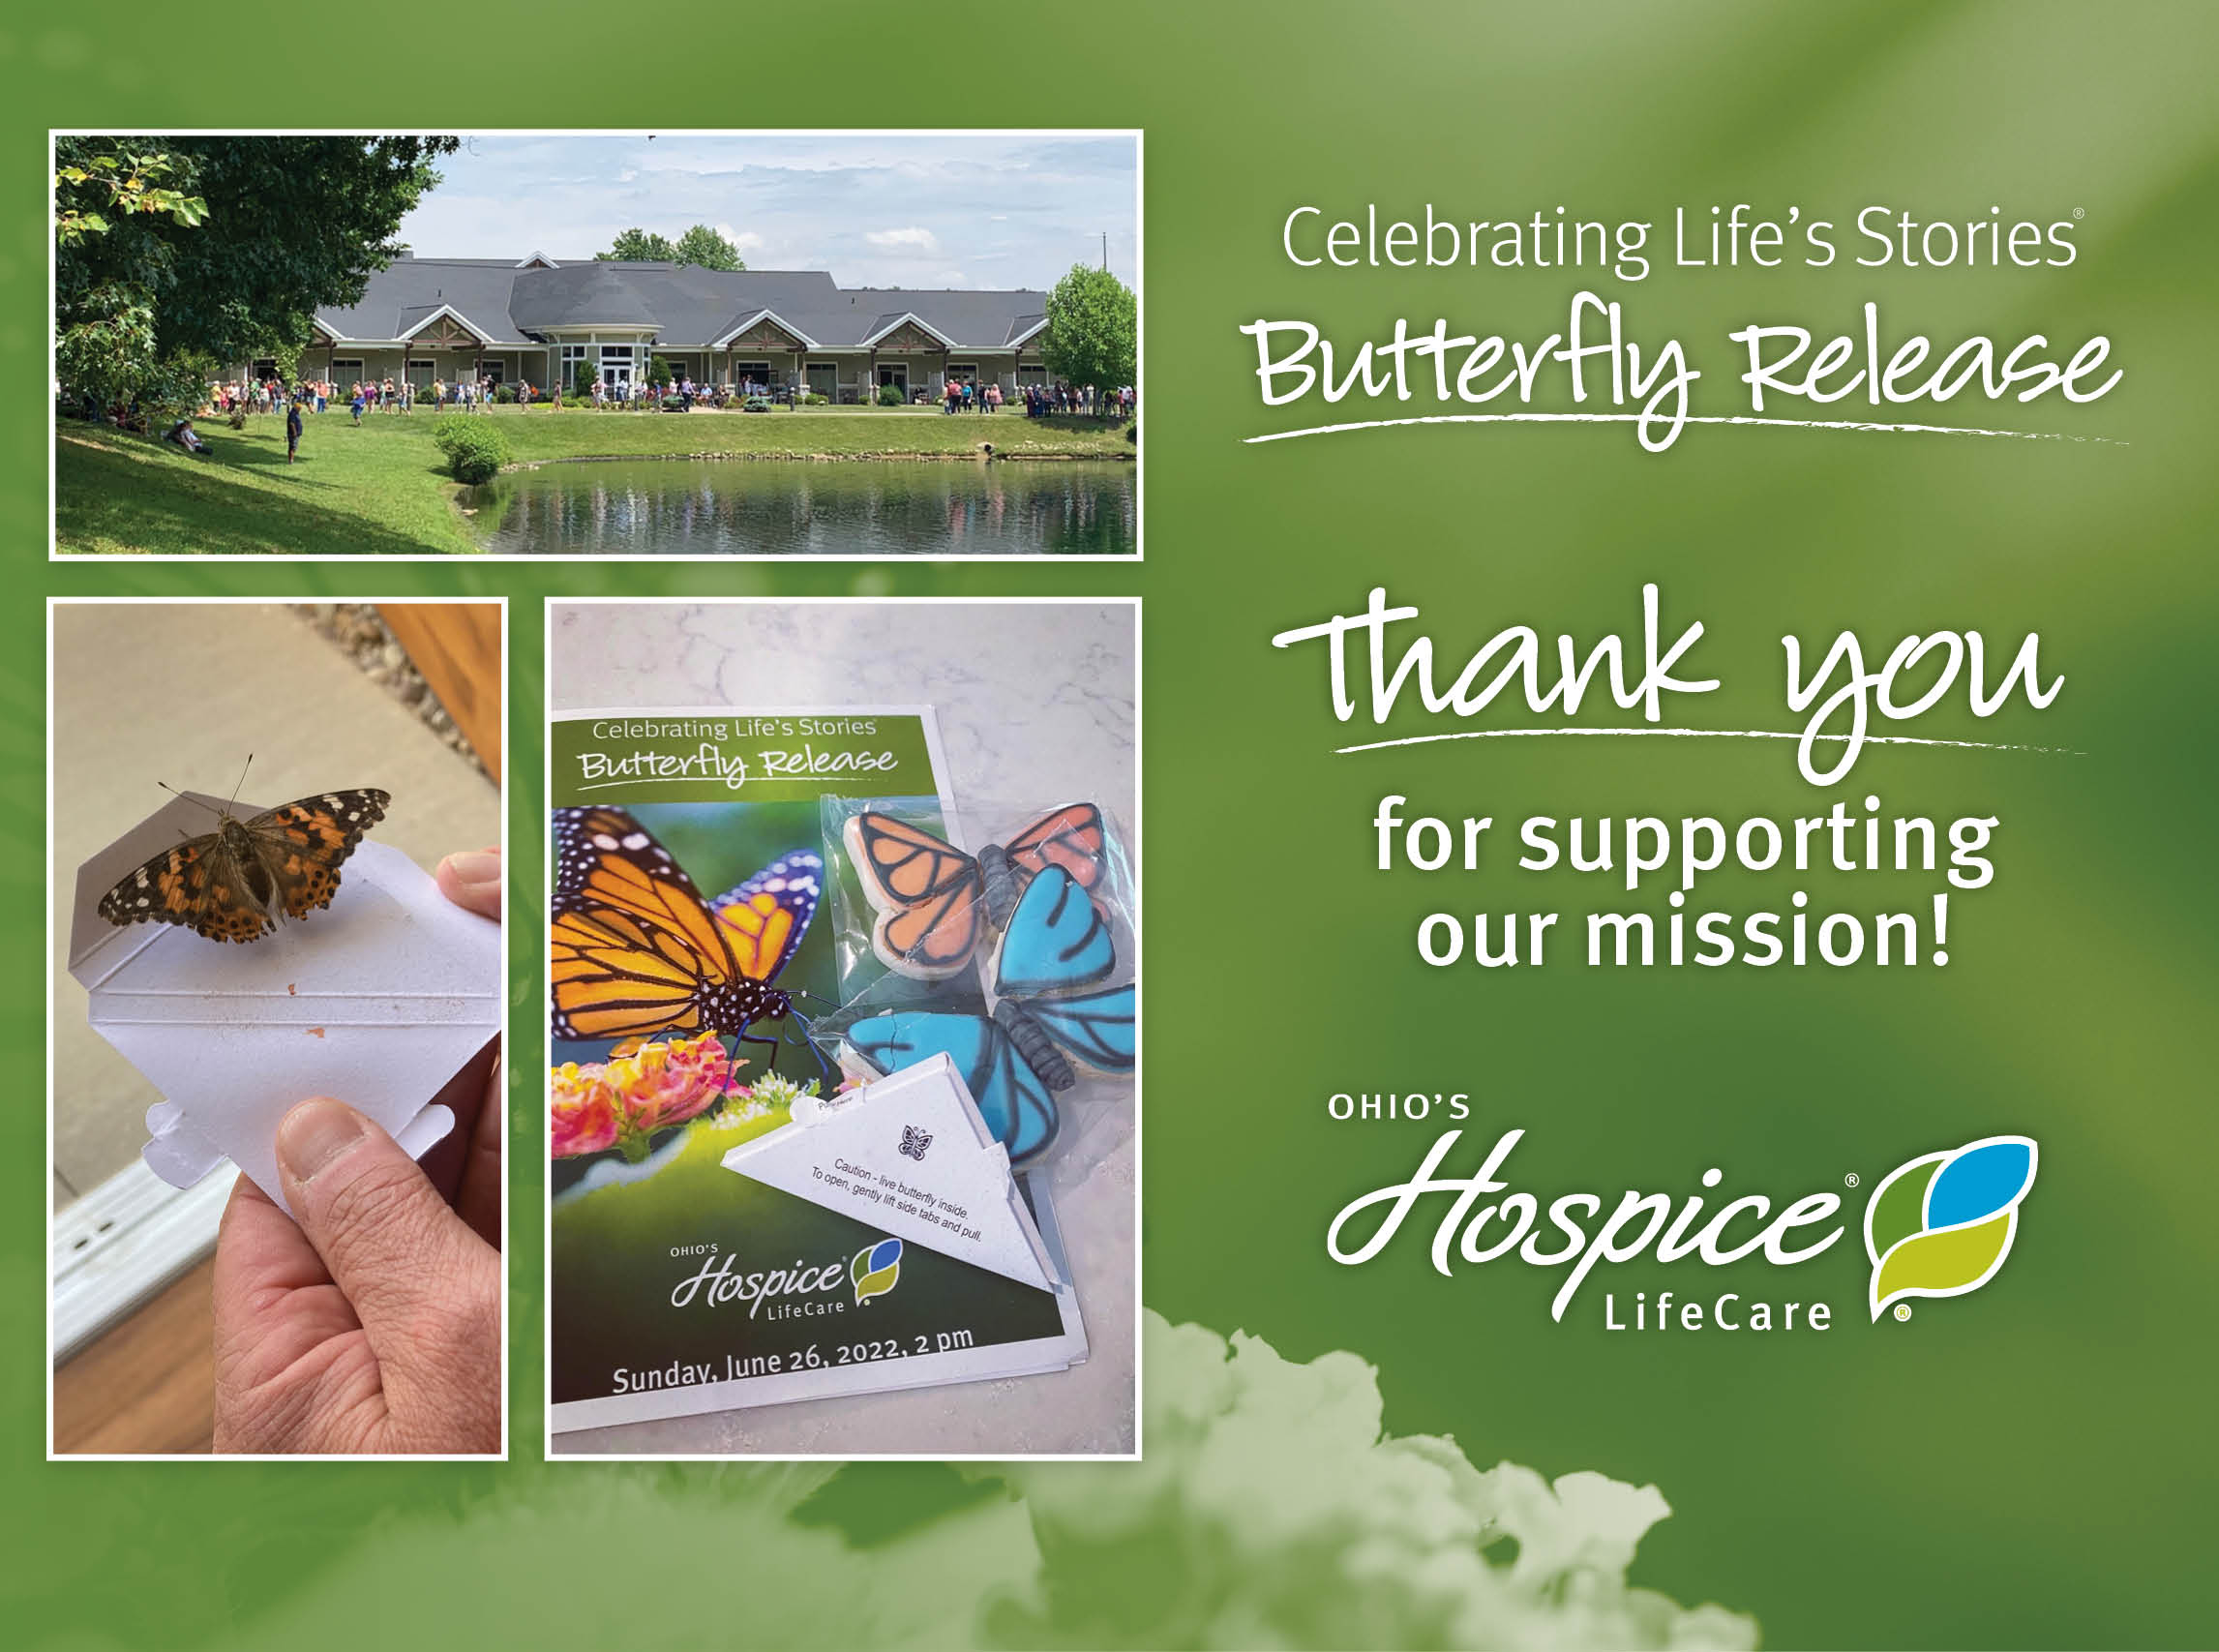 Ohio's Hospice LifeCare Butterfly